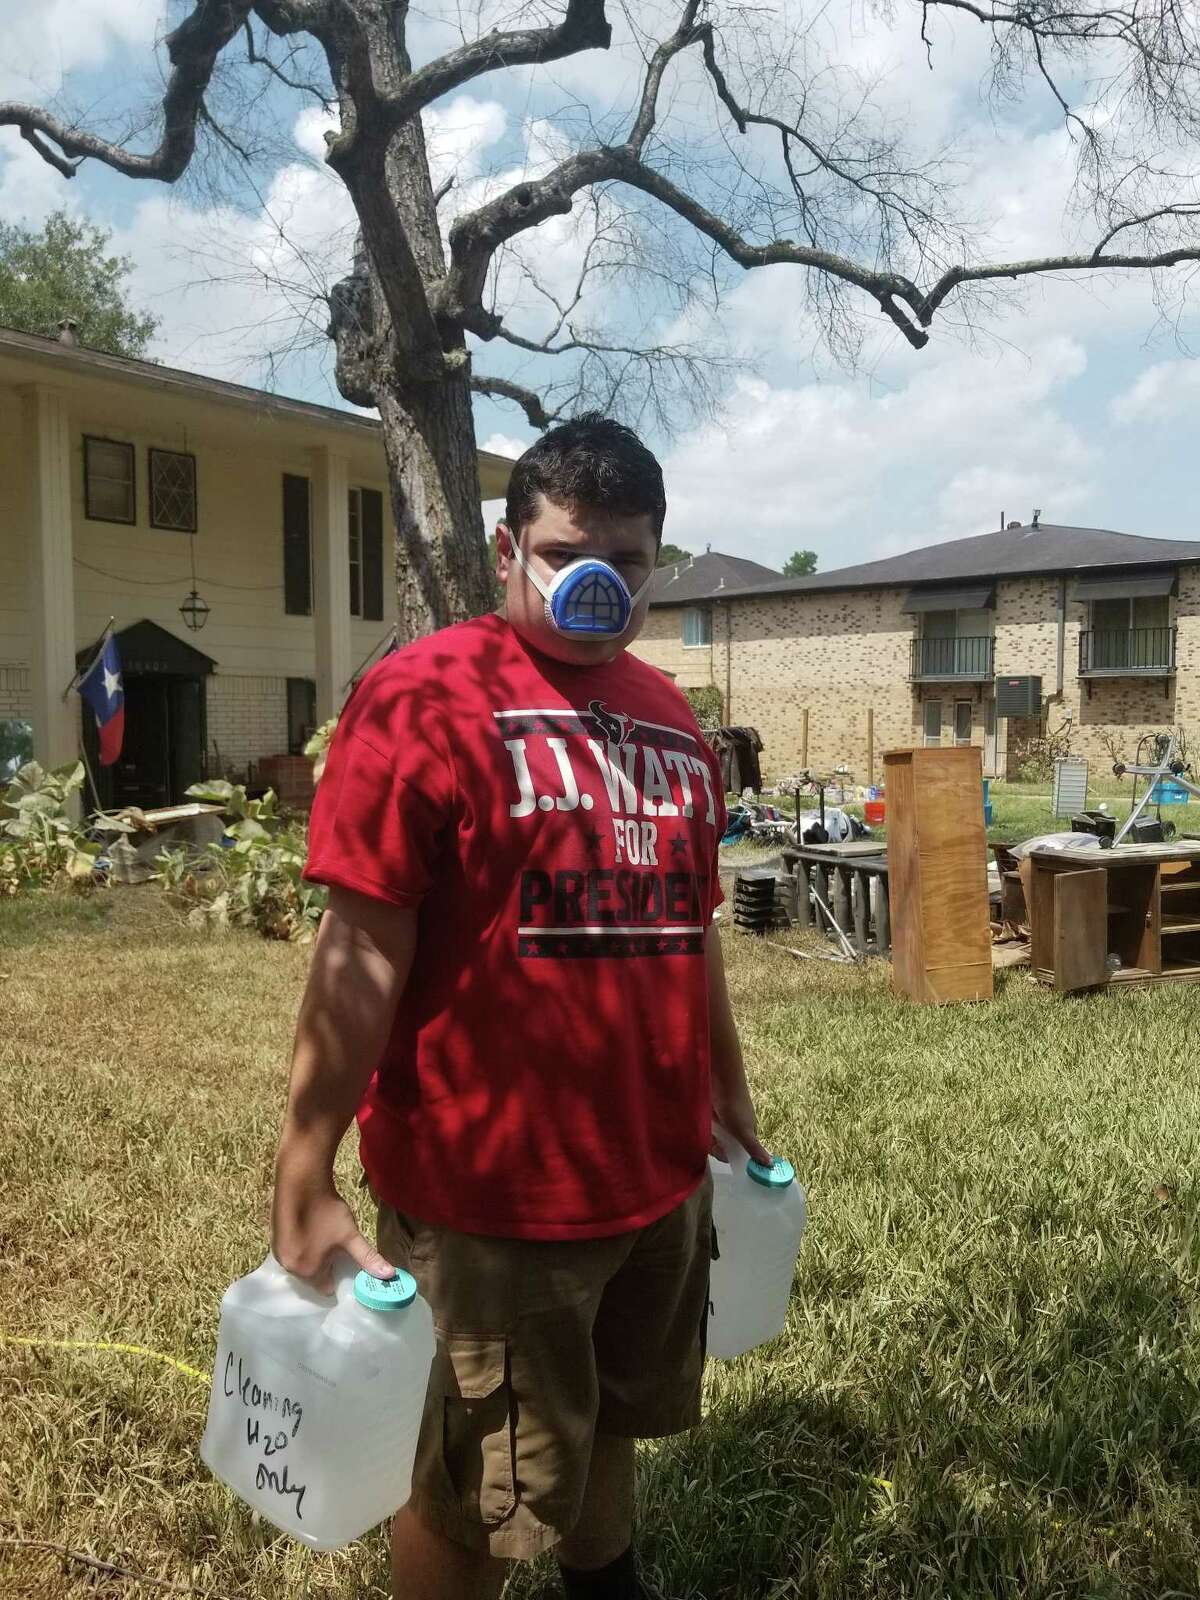 Grant Manier, a 22-year-old with autism, is helping clean up storm-damaged homes.